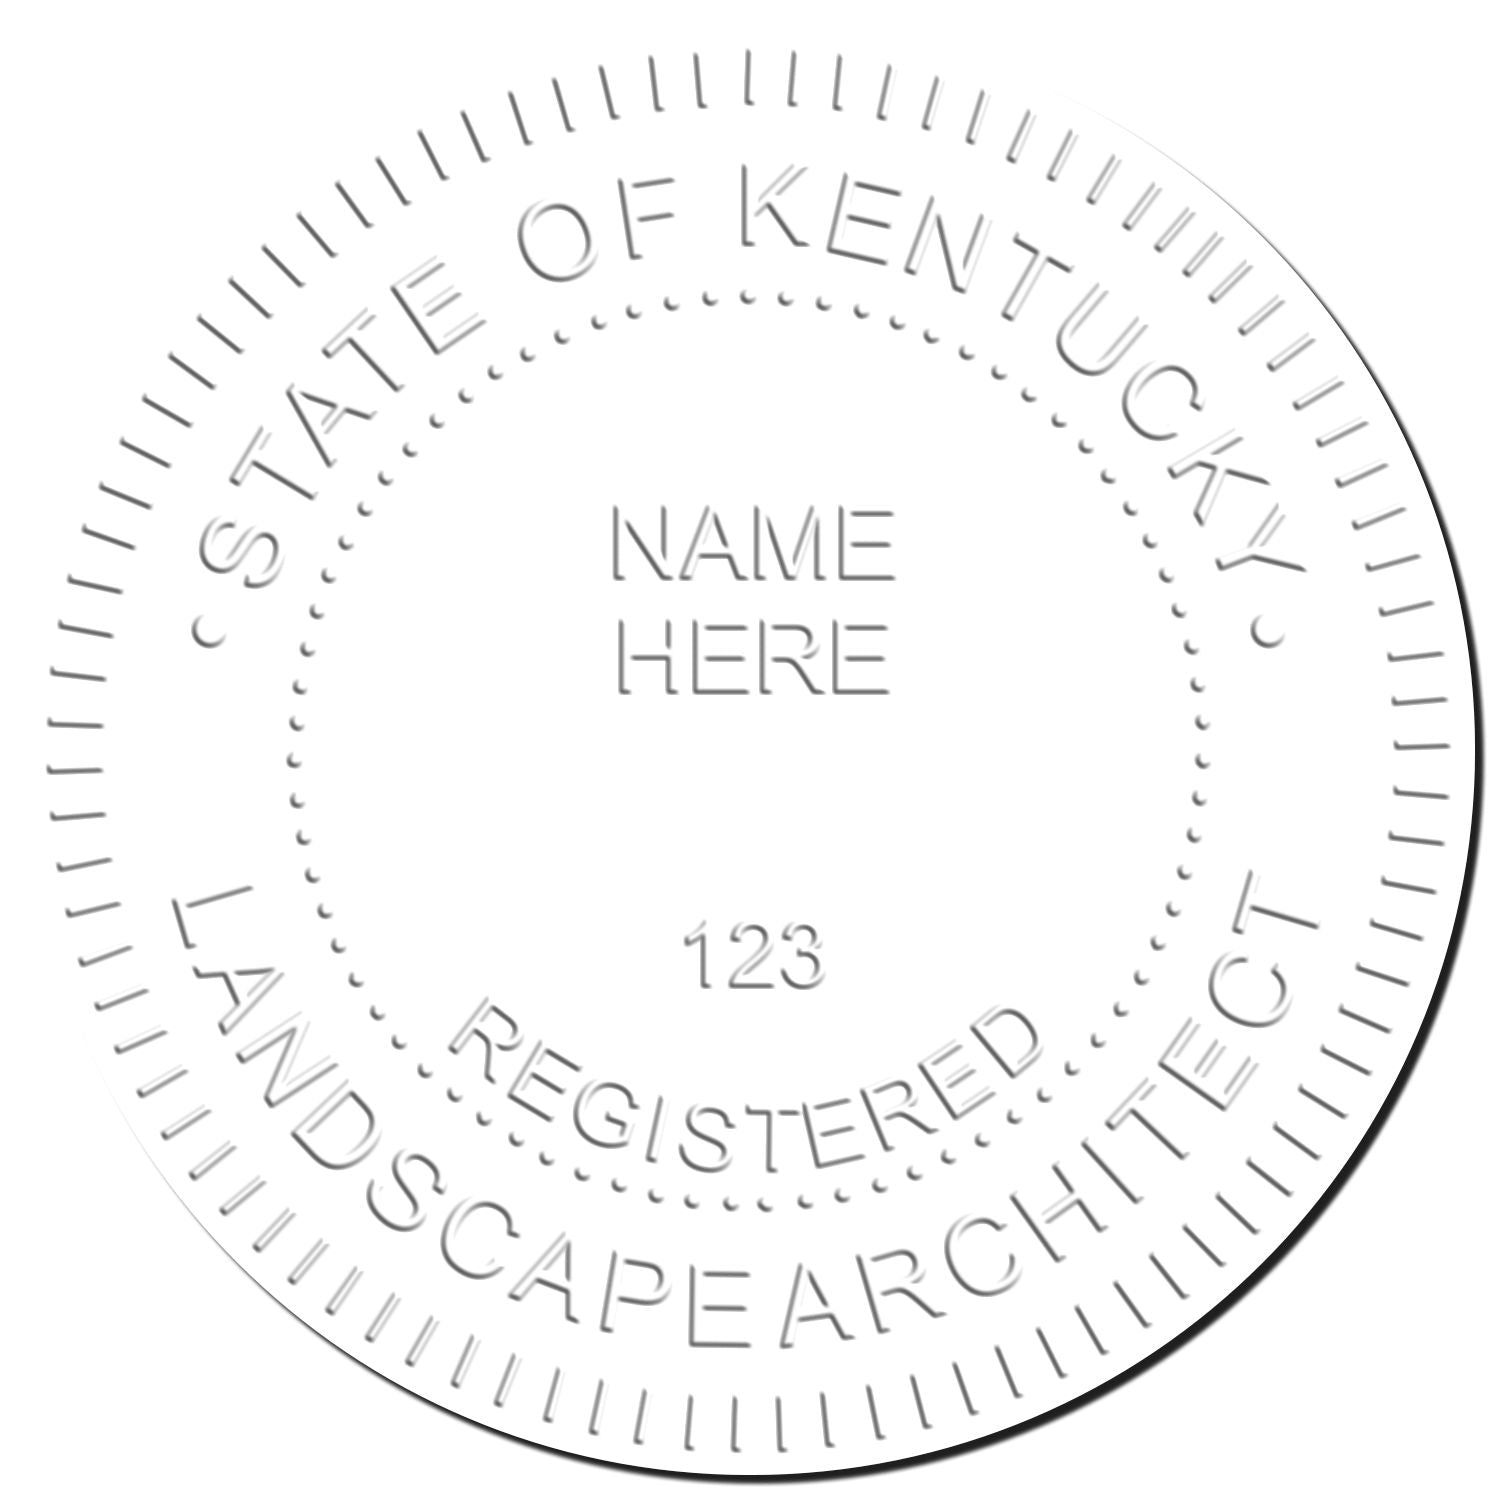 This paper is stamped with a sample imprint of the State of Kentucky Handheld Landscape Architect Seal, signifying its quality and reliability.